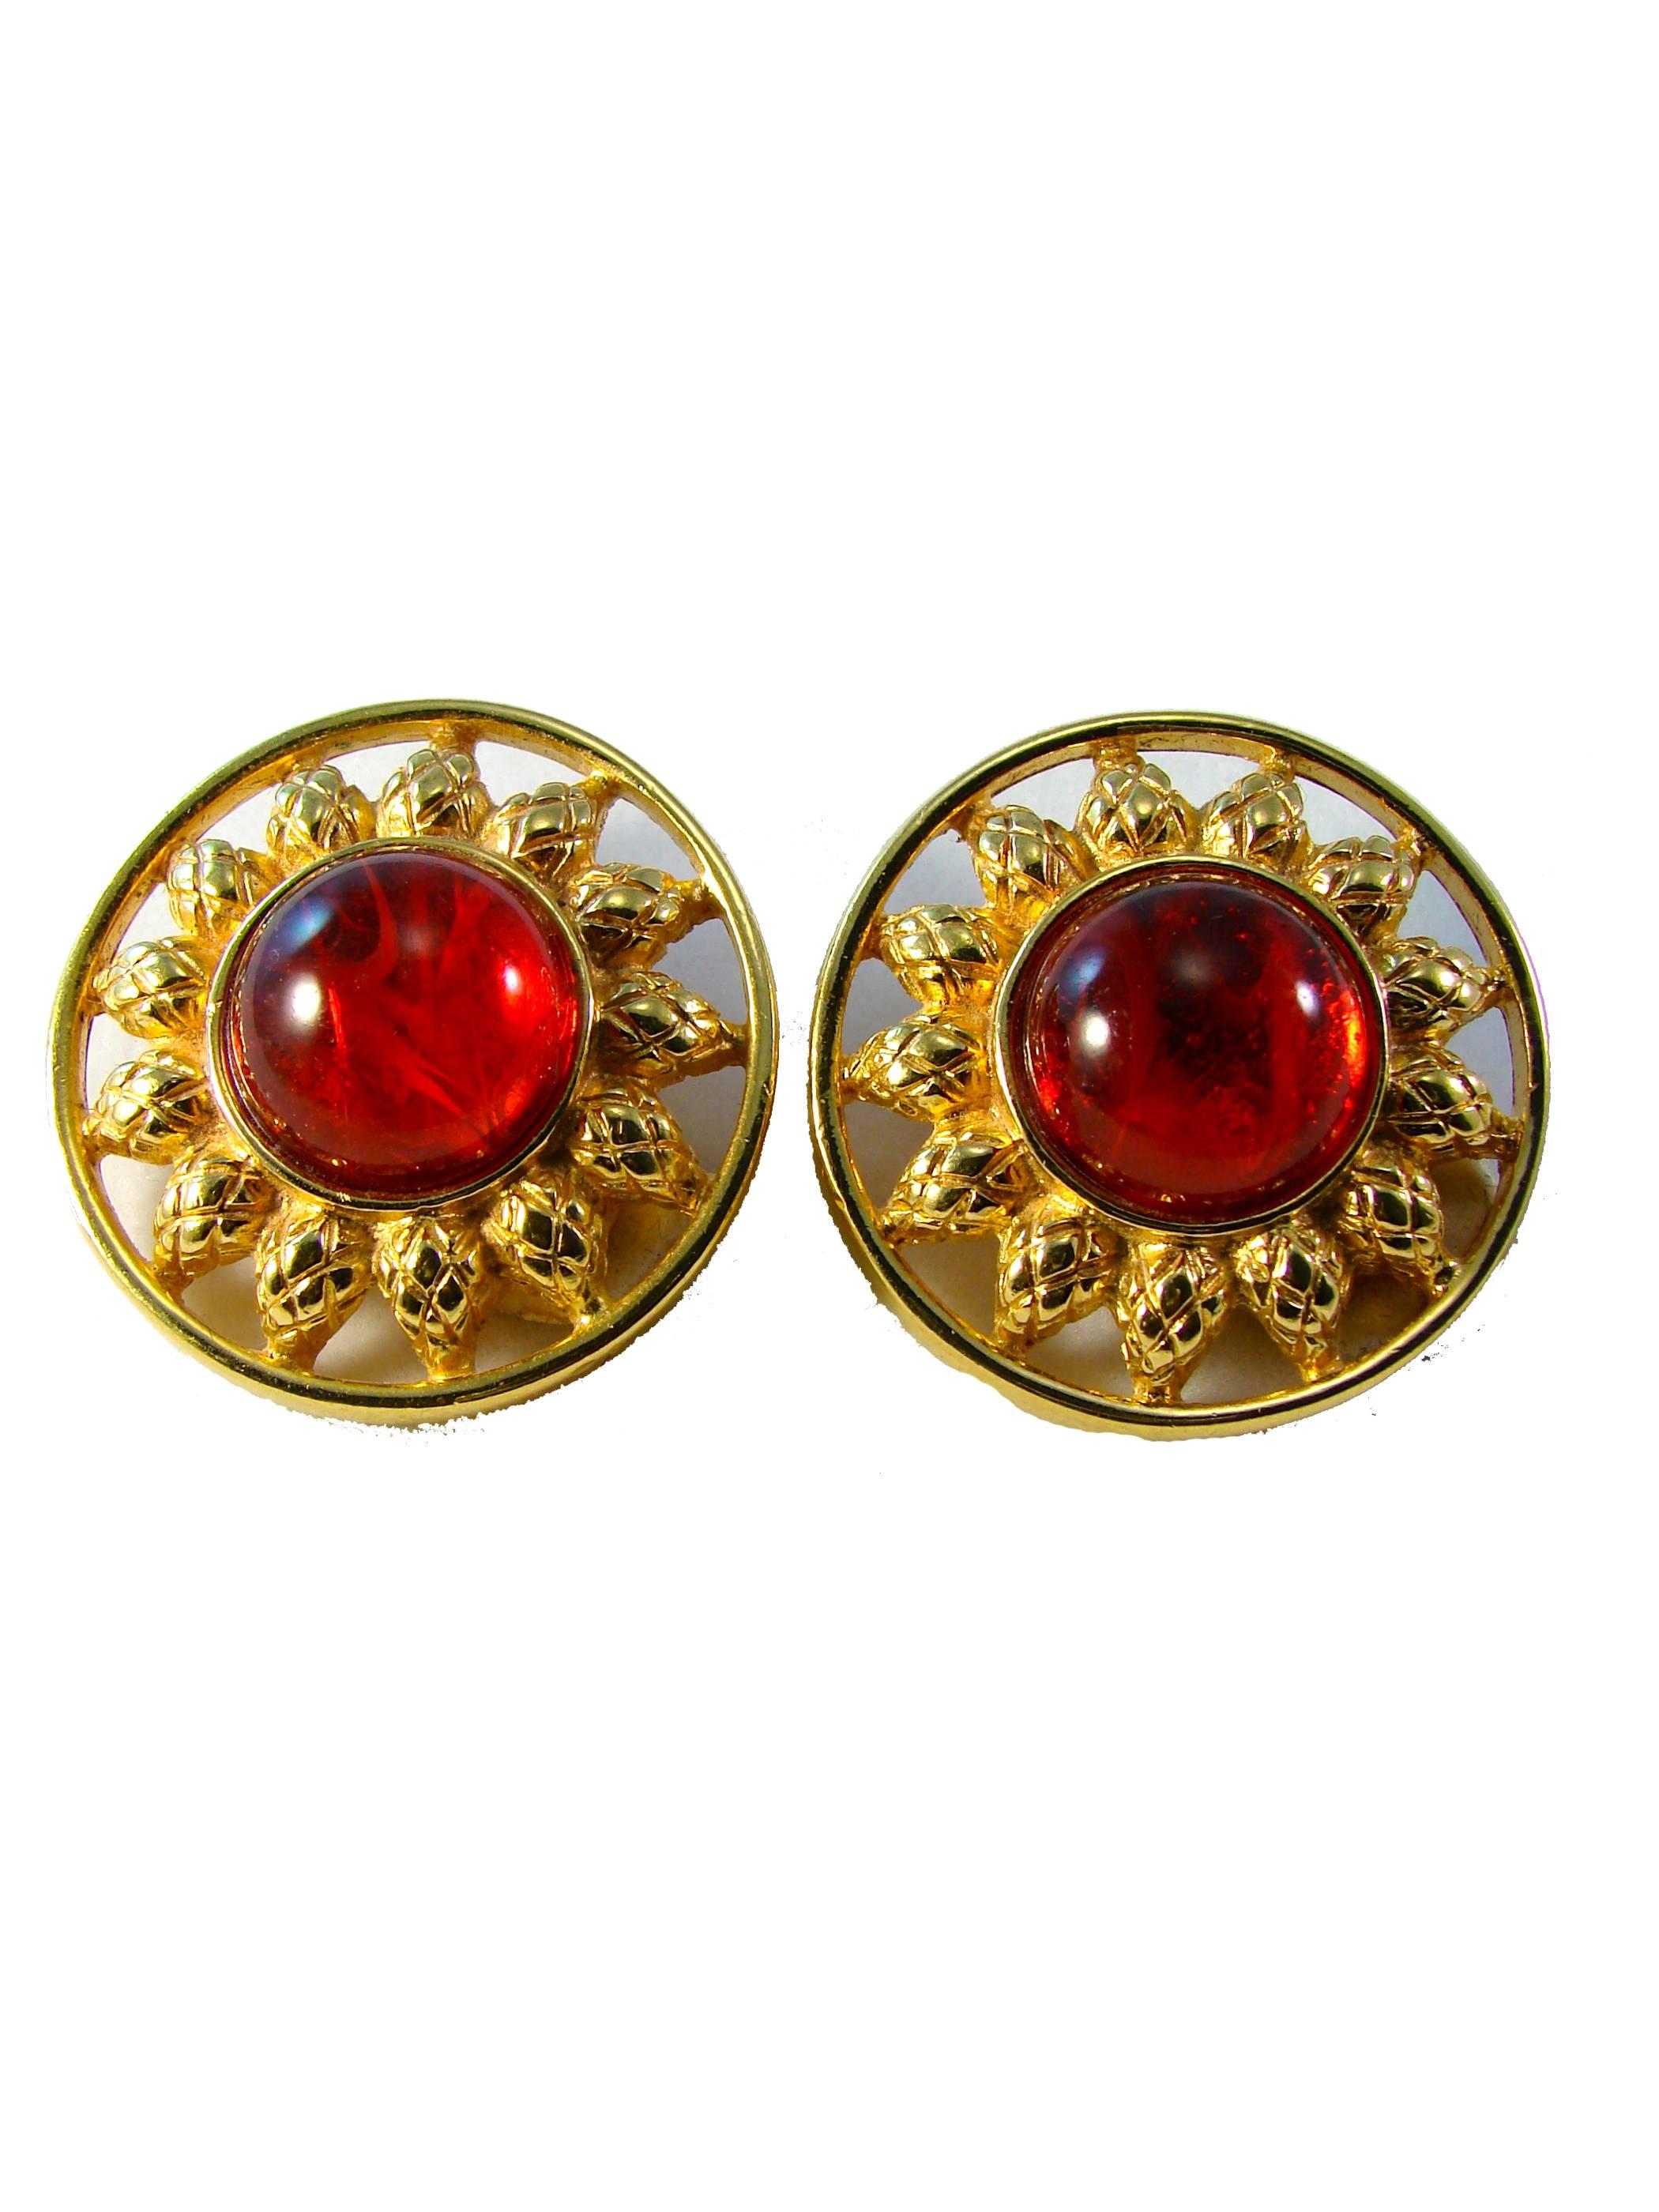 Incredible vintage earrings from Fendi feature a figural gold metal sun setting with large red glass cabochon center.  Clip Style.  Preowned with minimal signs of wear.  Earrings measure appx 1.5